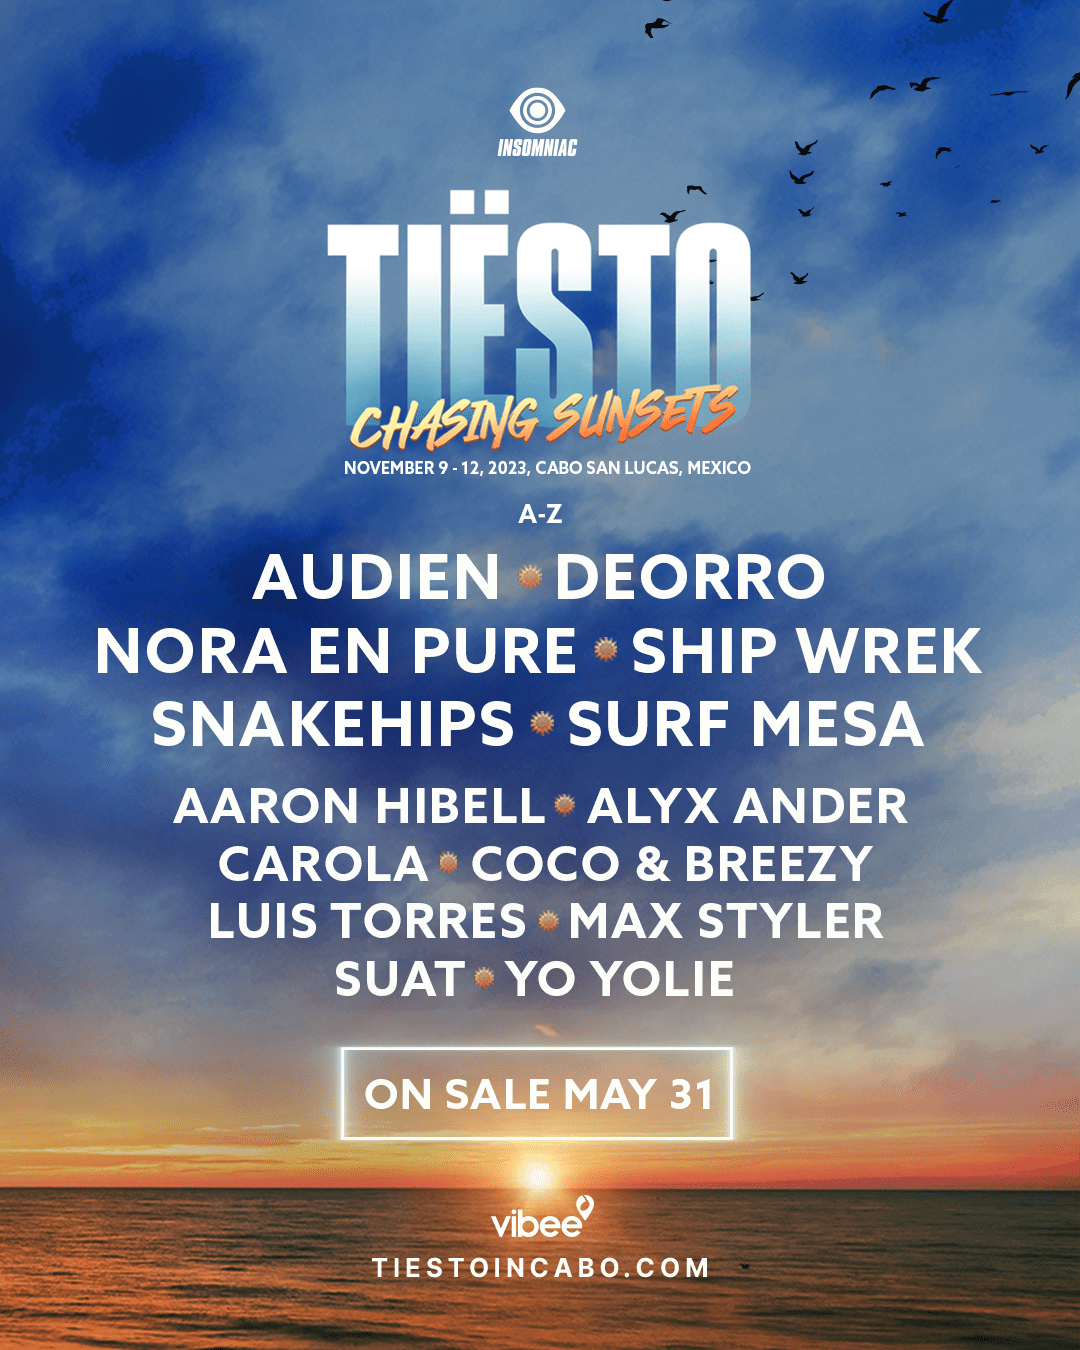 Tiësto’s Chasing Sunsets 2023 Lineup poster image